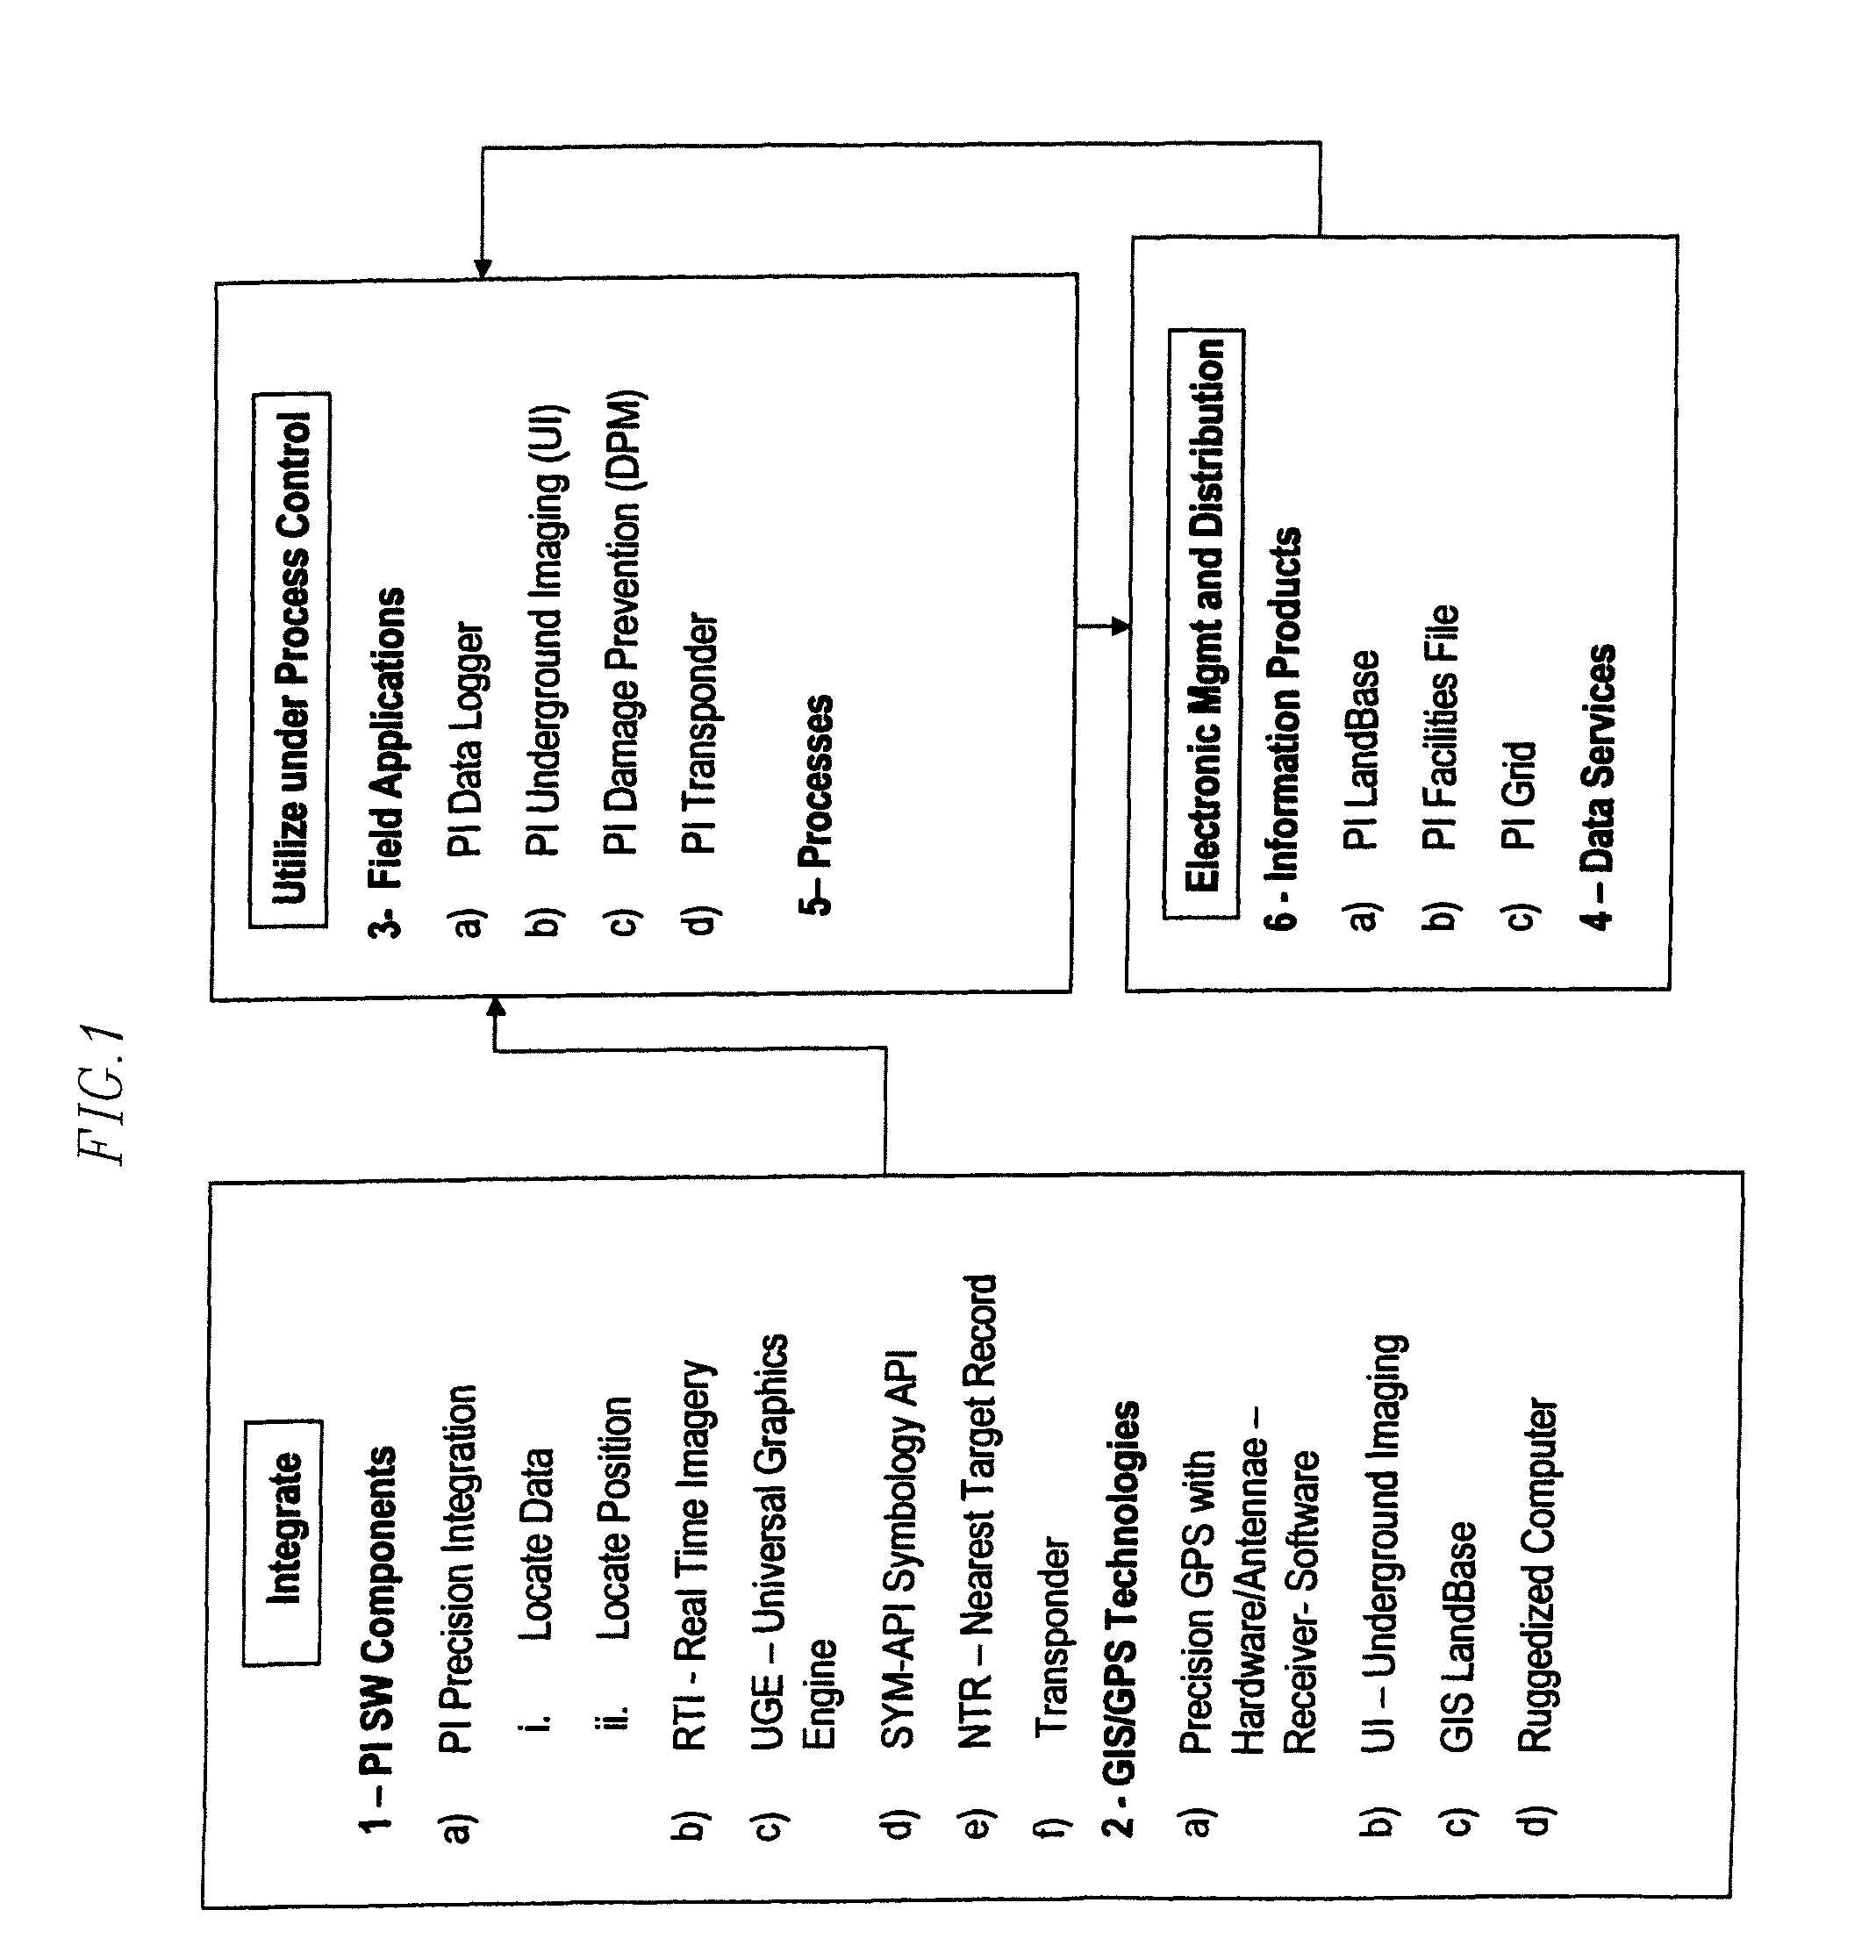 System and method for collecting information related to utility assets